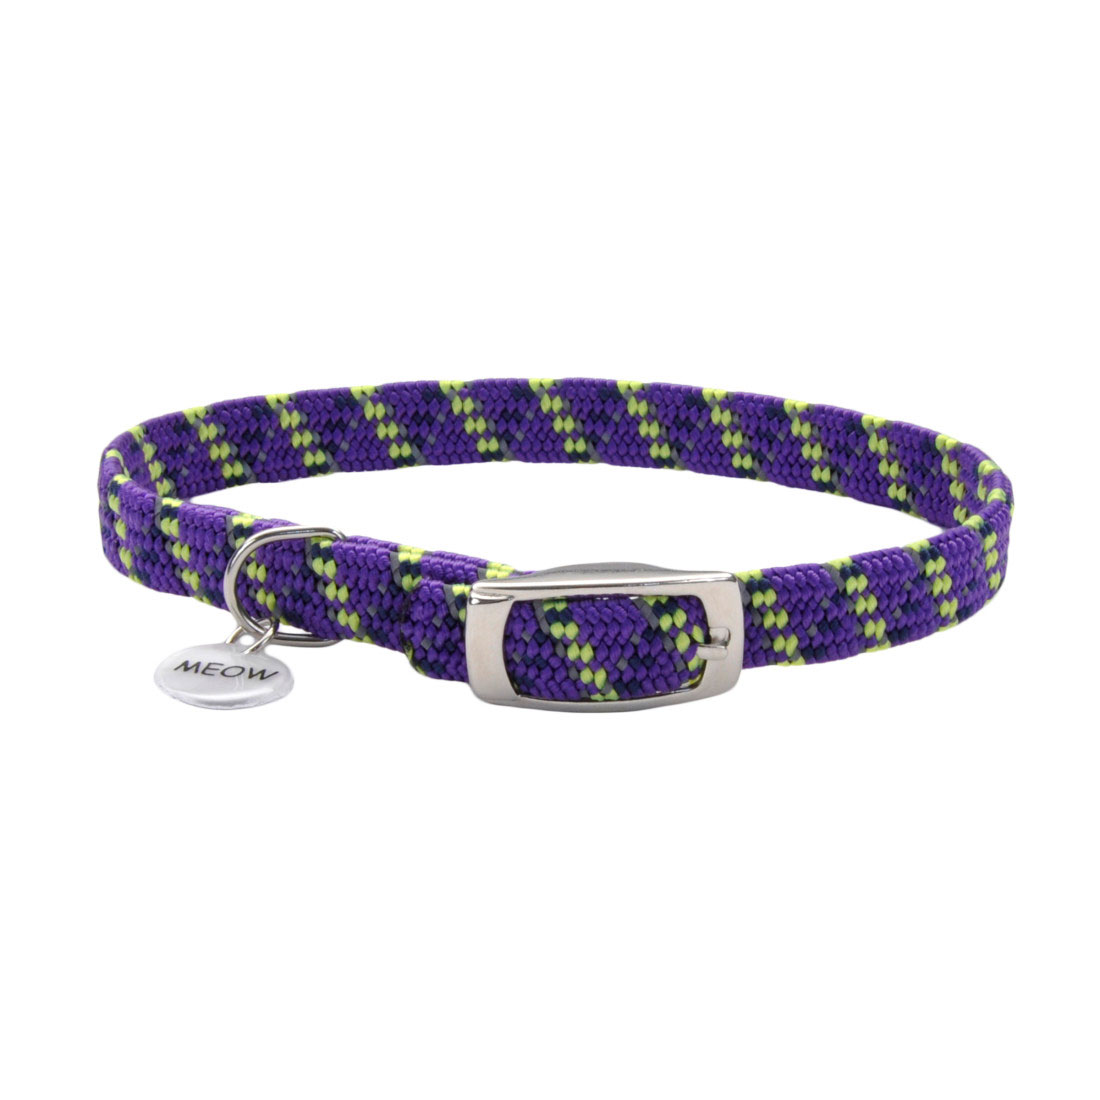 ElastaCat® Reflective Safety Stretch Collar with Reflective Charm